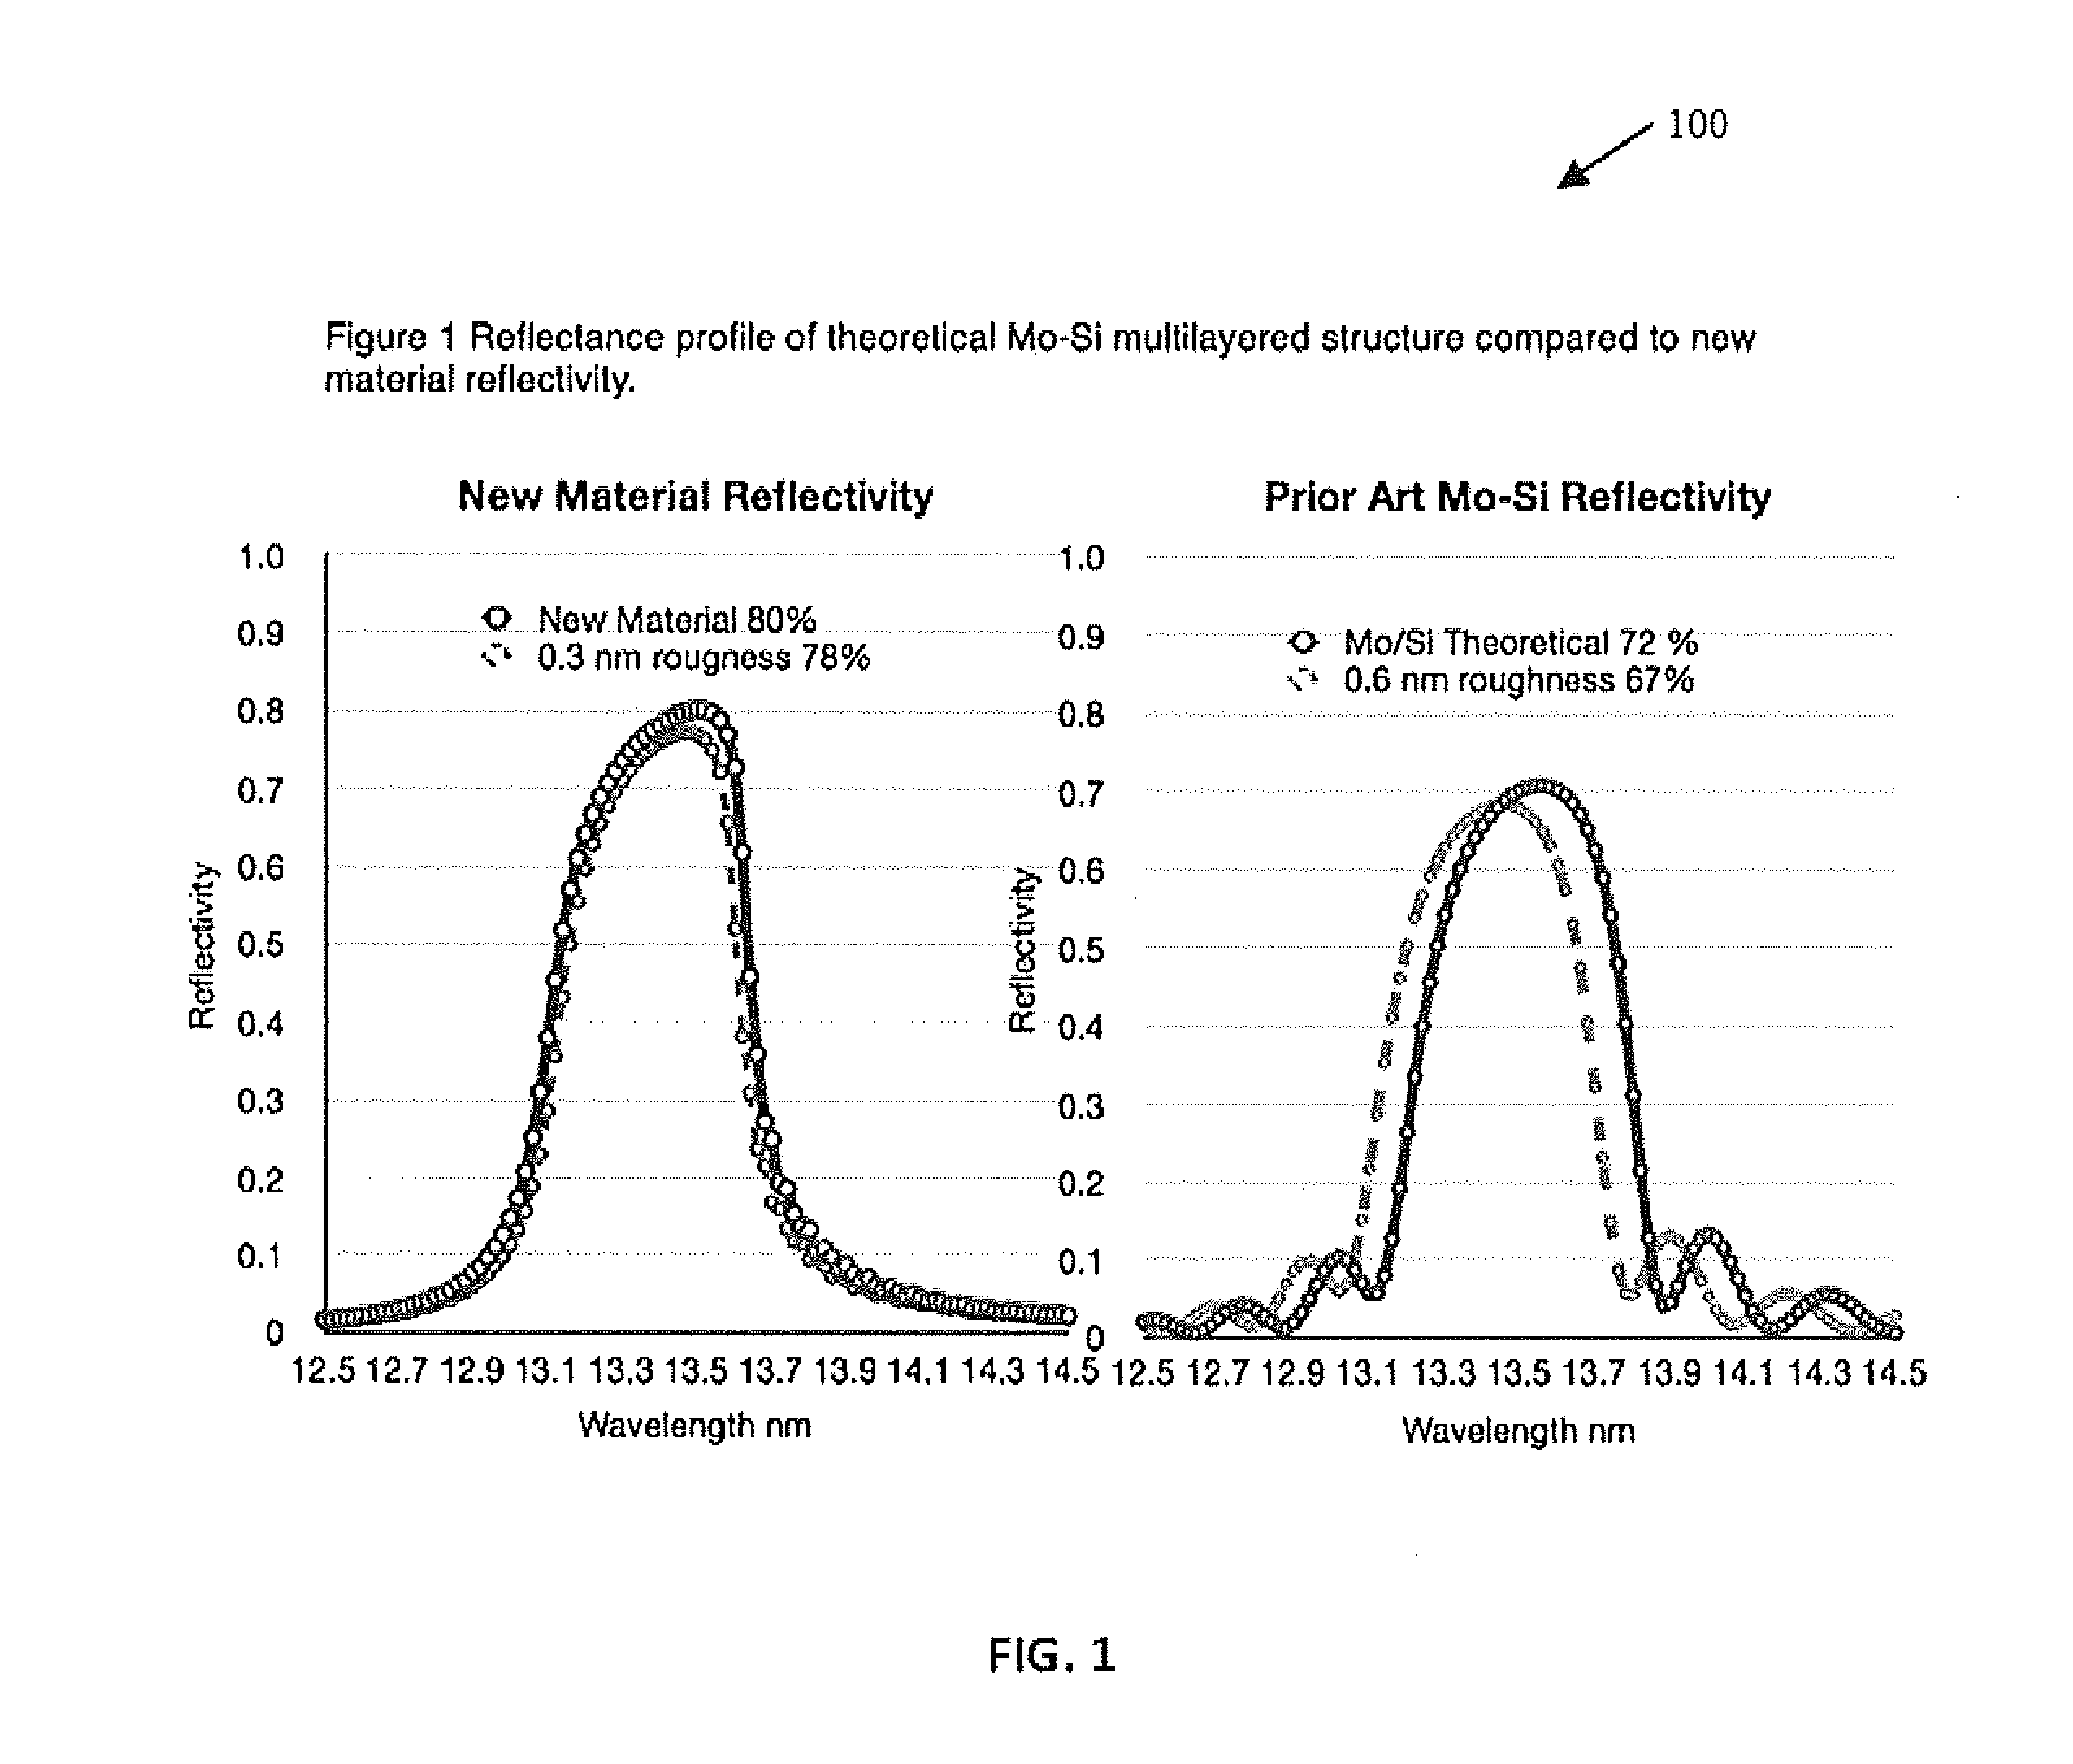 Materials, components, and methods for use with extreme ultraviolet radiation in lithography and other applications